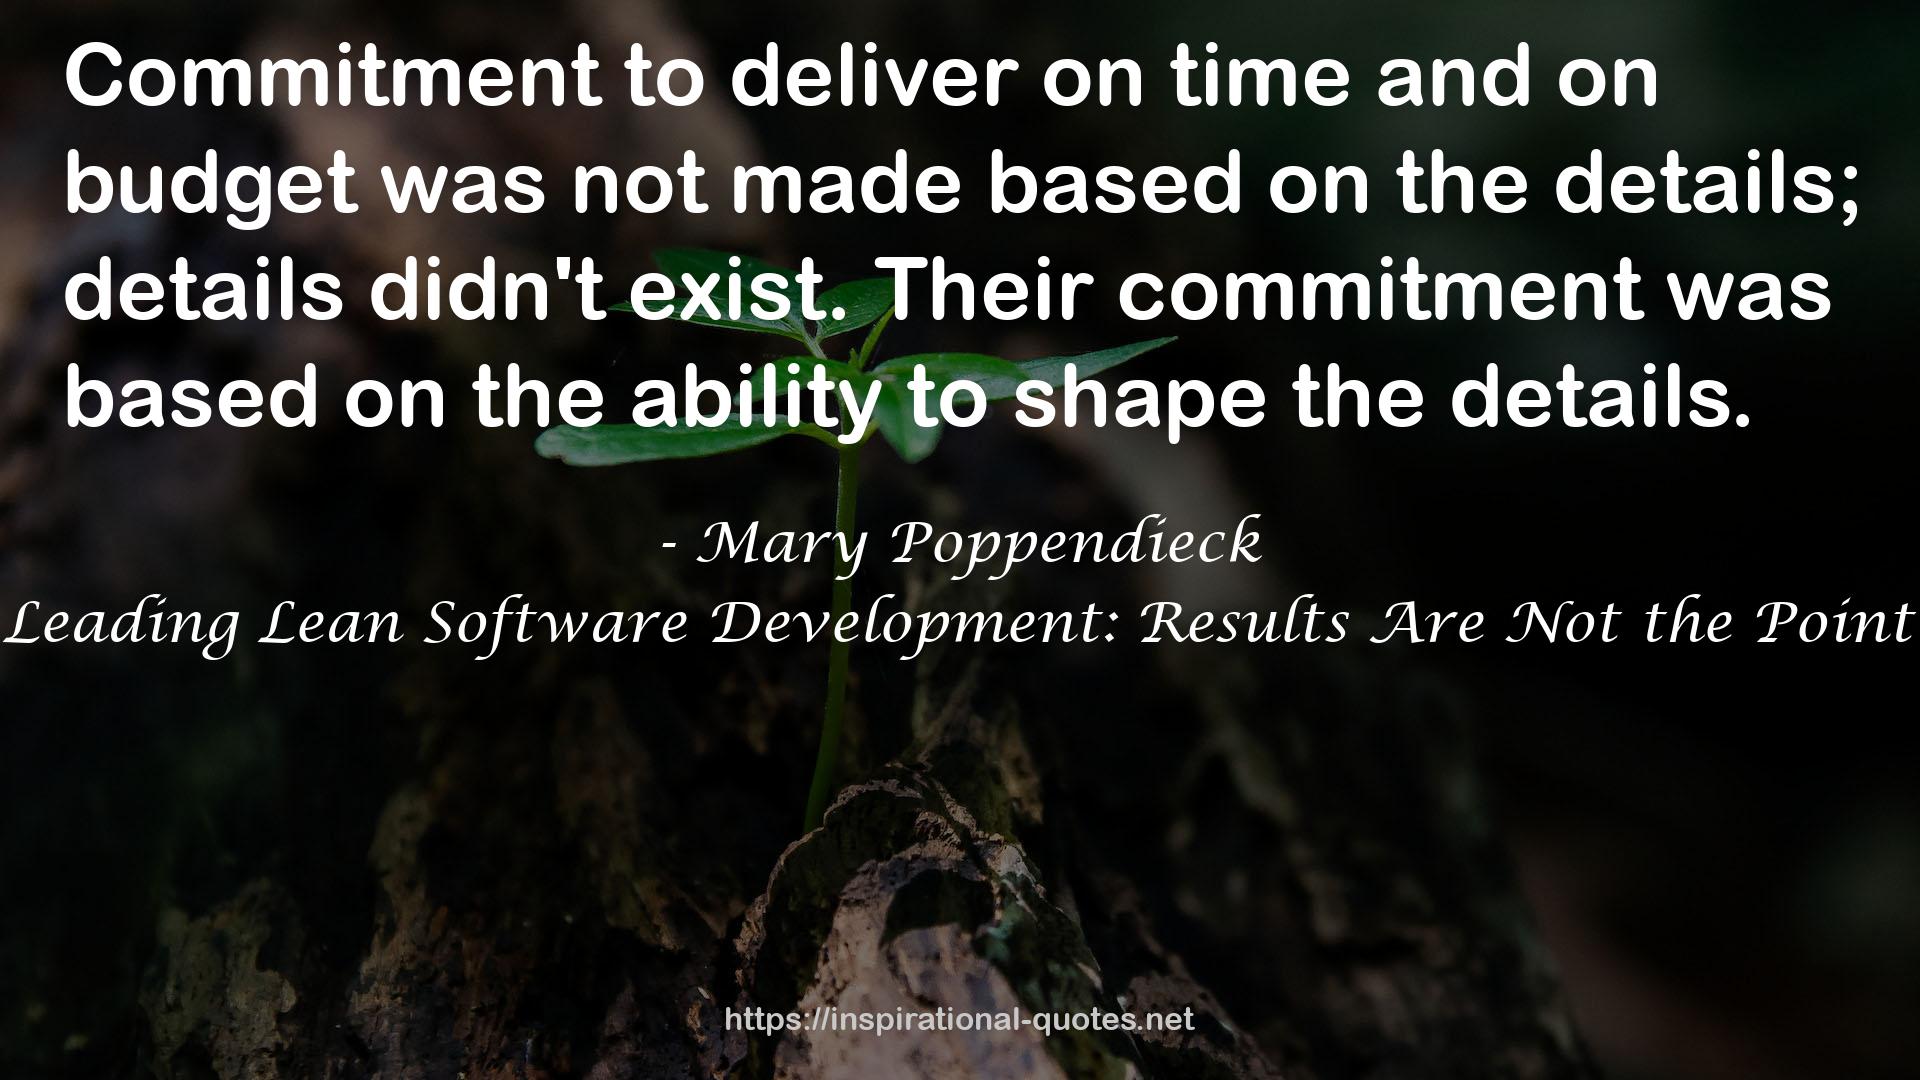 Mary Poppendieck QUOTES